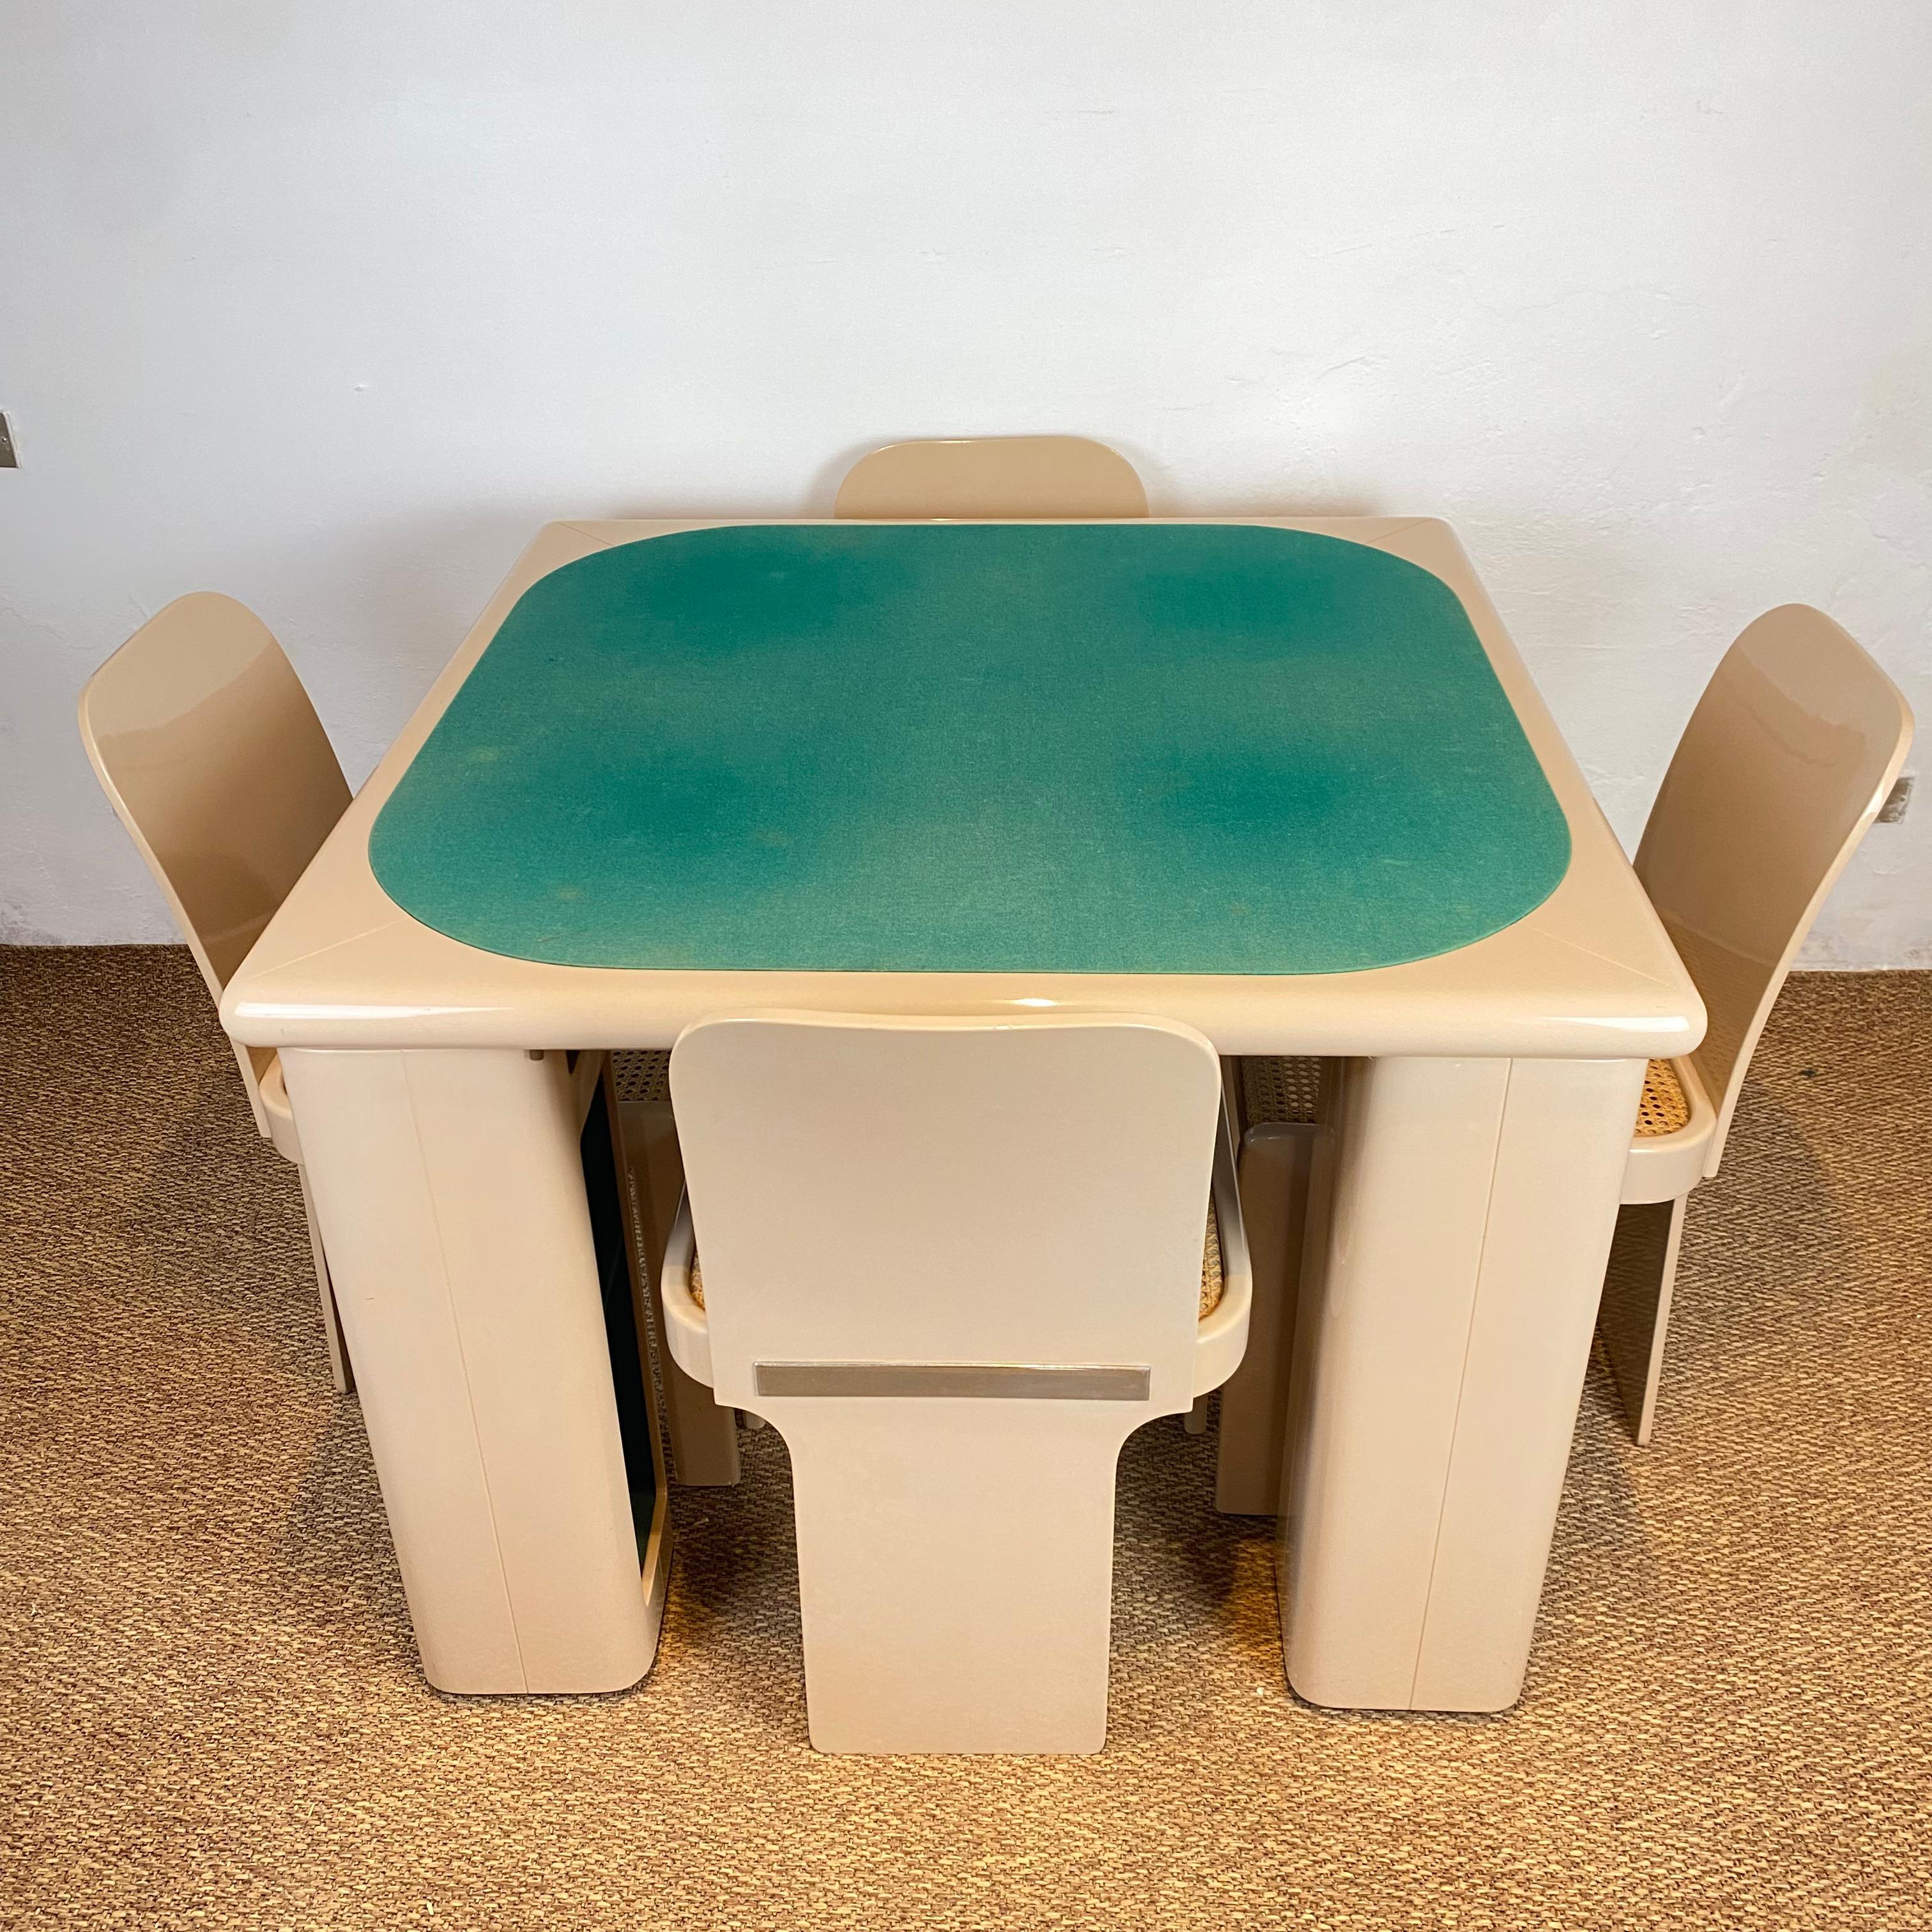 Superb and very rare set designed by Pierluigi Molinari and produced by Pozzi in Italy in the 70s, purchased exactly 48 years ago.

The set is in perfect vintage condition, complete with chairs and with the peculiarity of the legs that rotate,